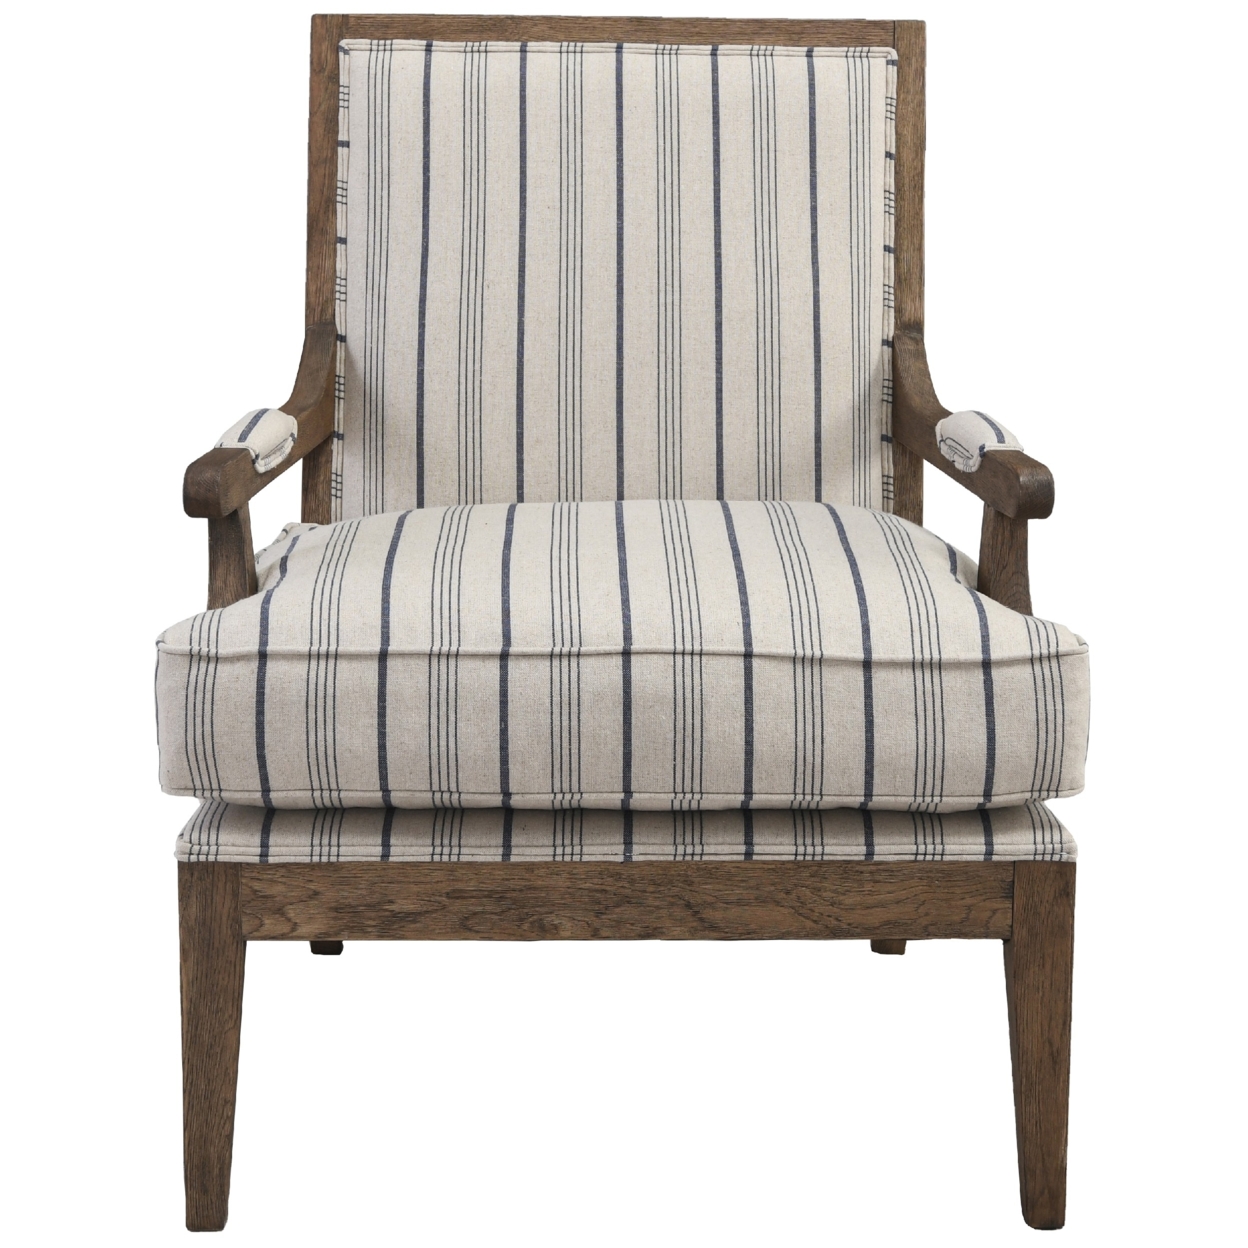 29 Inch Upholstered Accent Chair, Striped, Kiln Dried Wood, Blue, White- Saltoro Sherpi